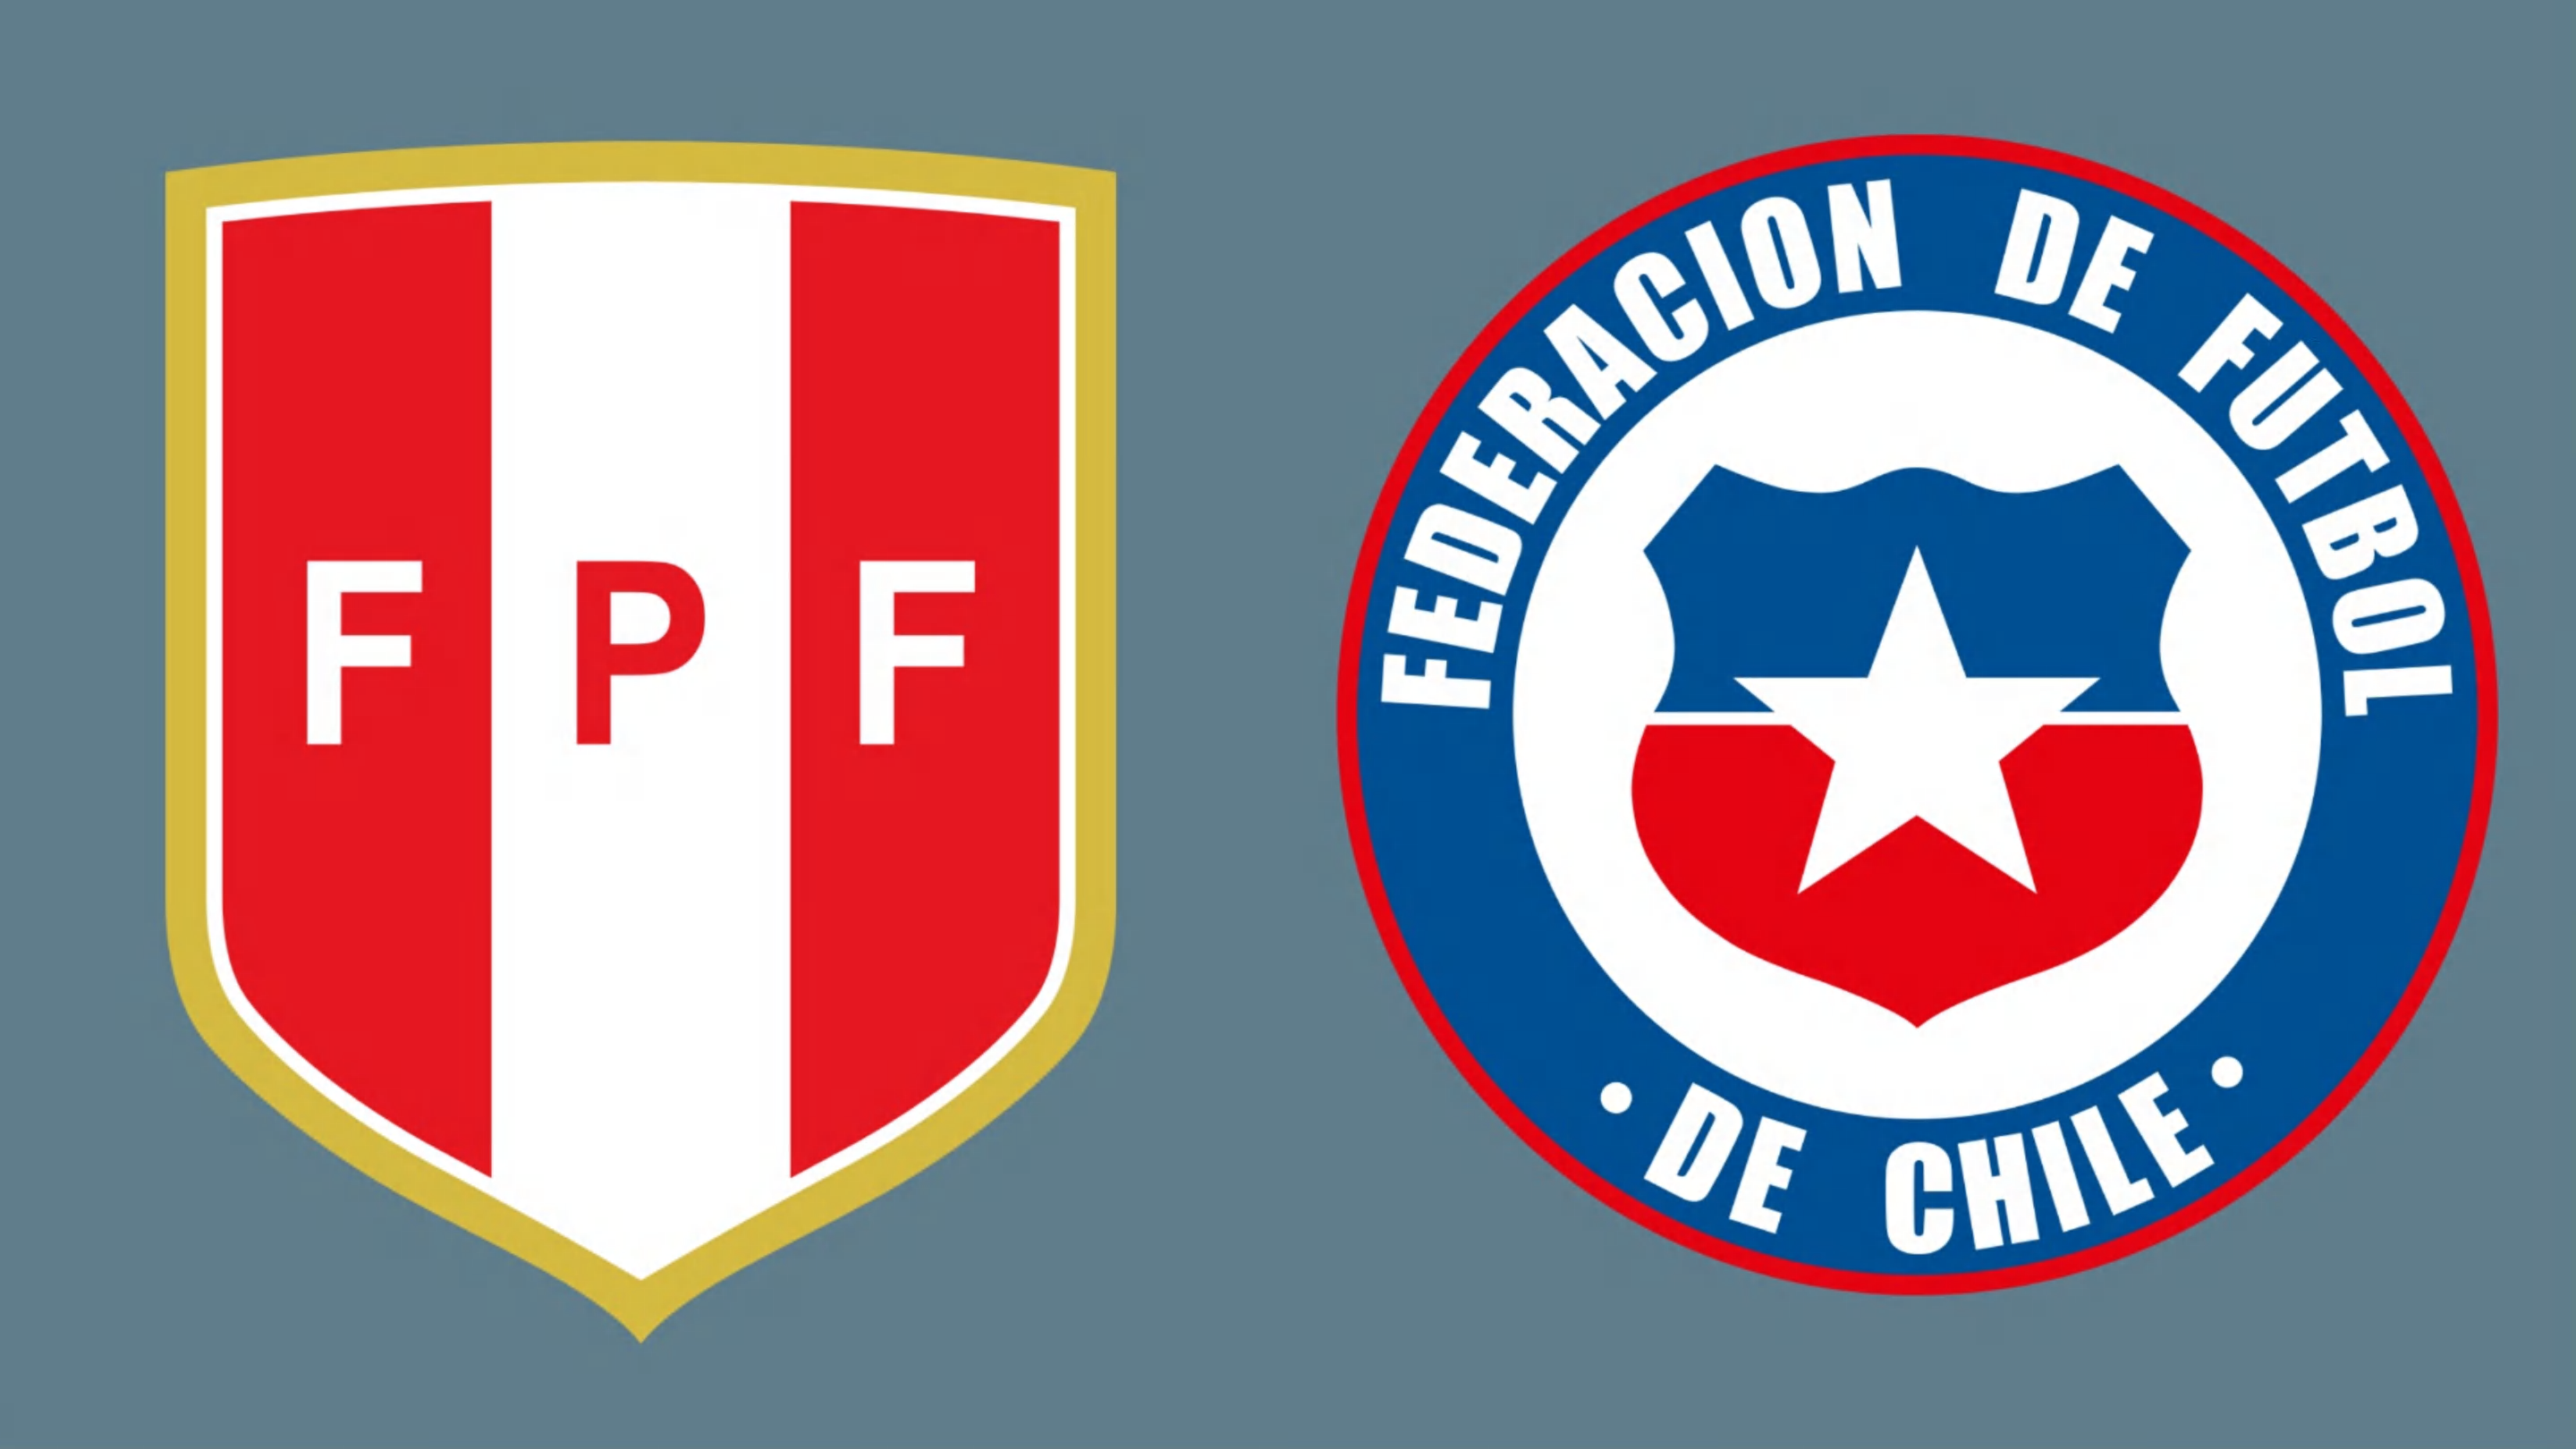 Peru vs Chile: Preview, predictions and team news